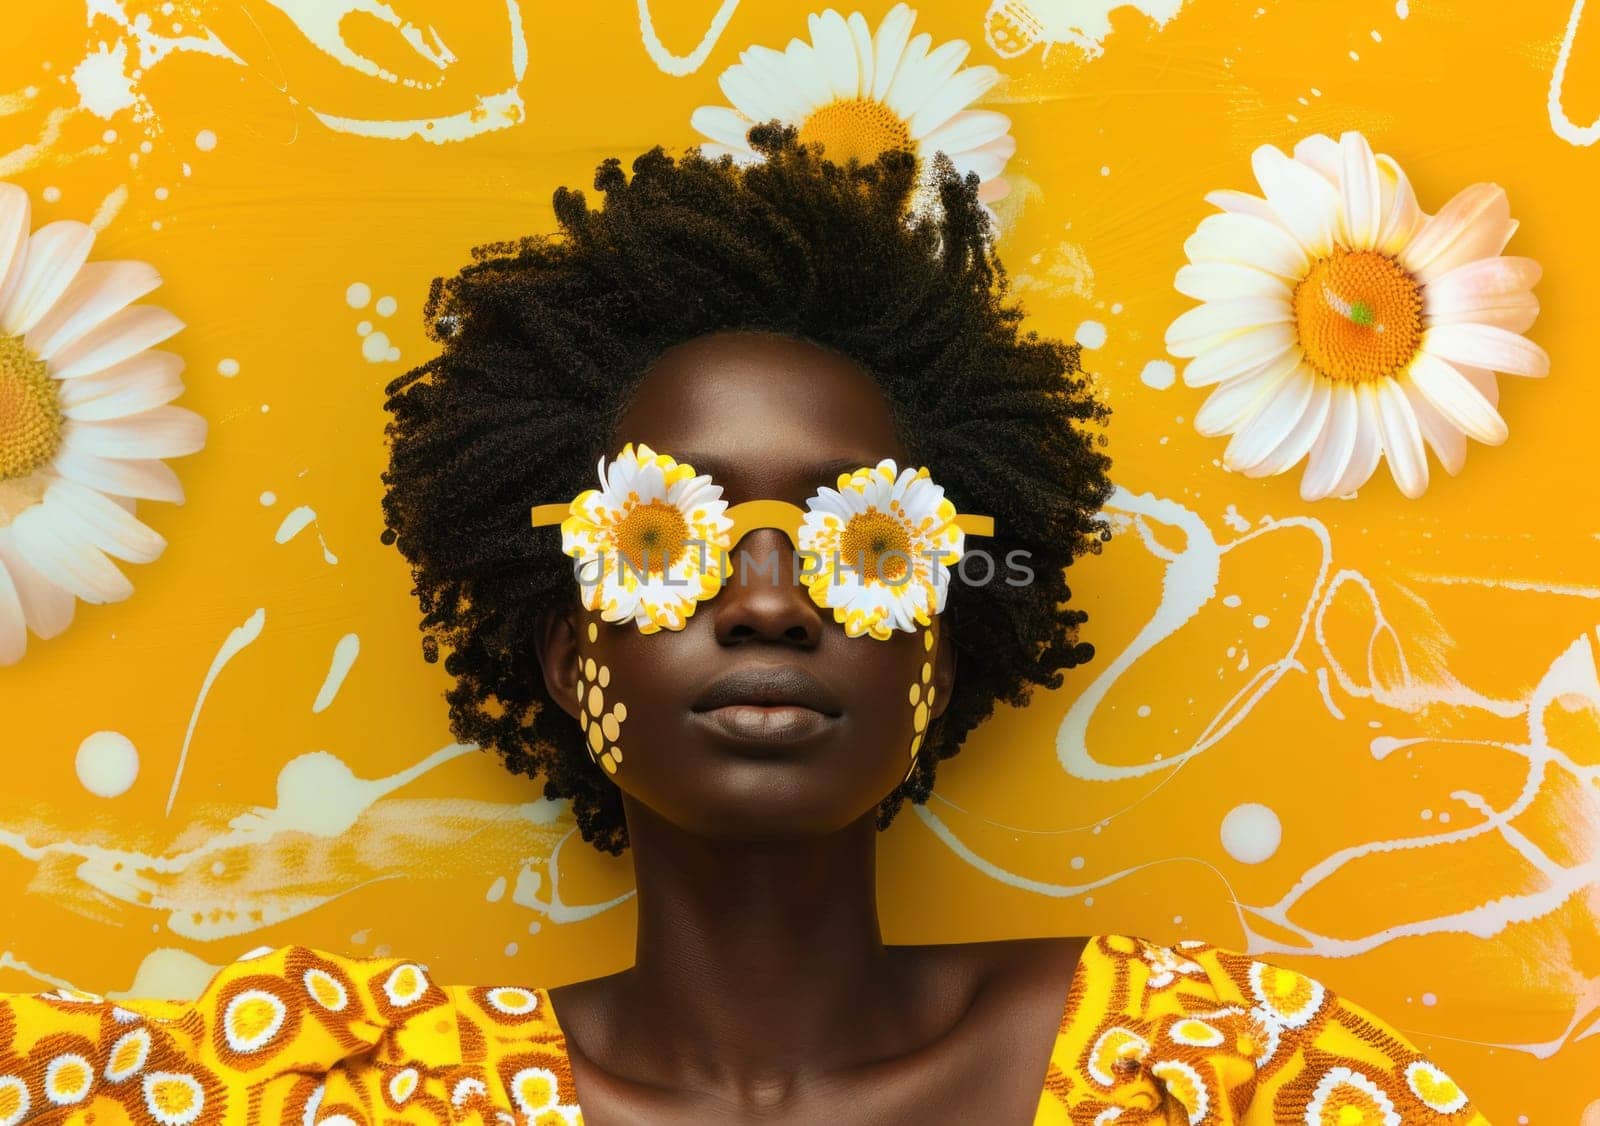 African woman with flowers in hair and sunglasses in front of yellow background beauty and fashion portrait trip concept by Vichizh